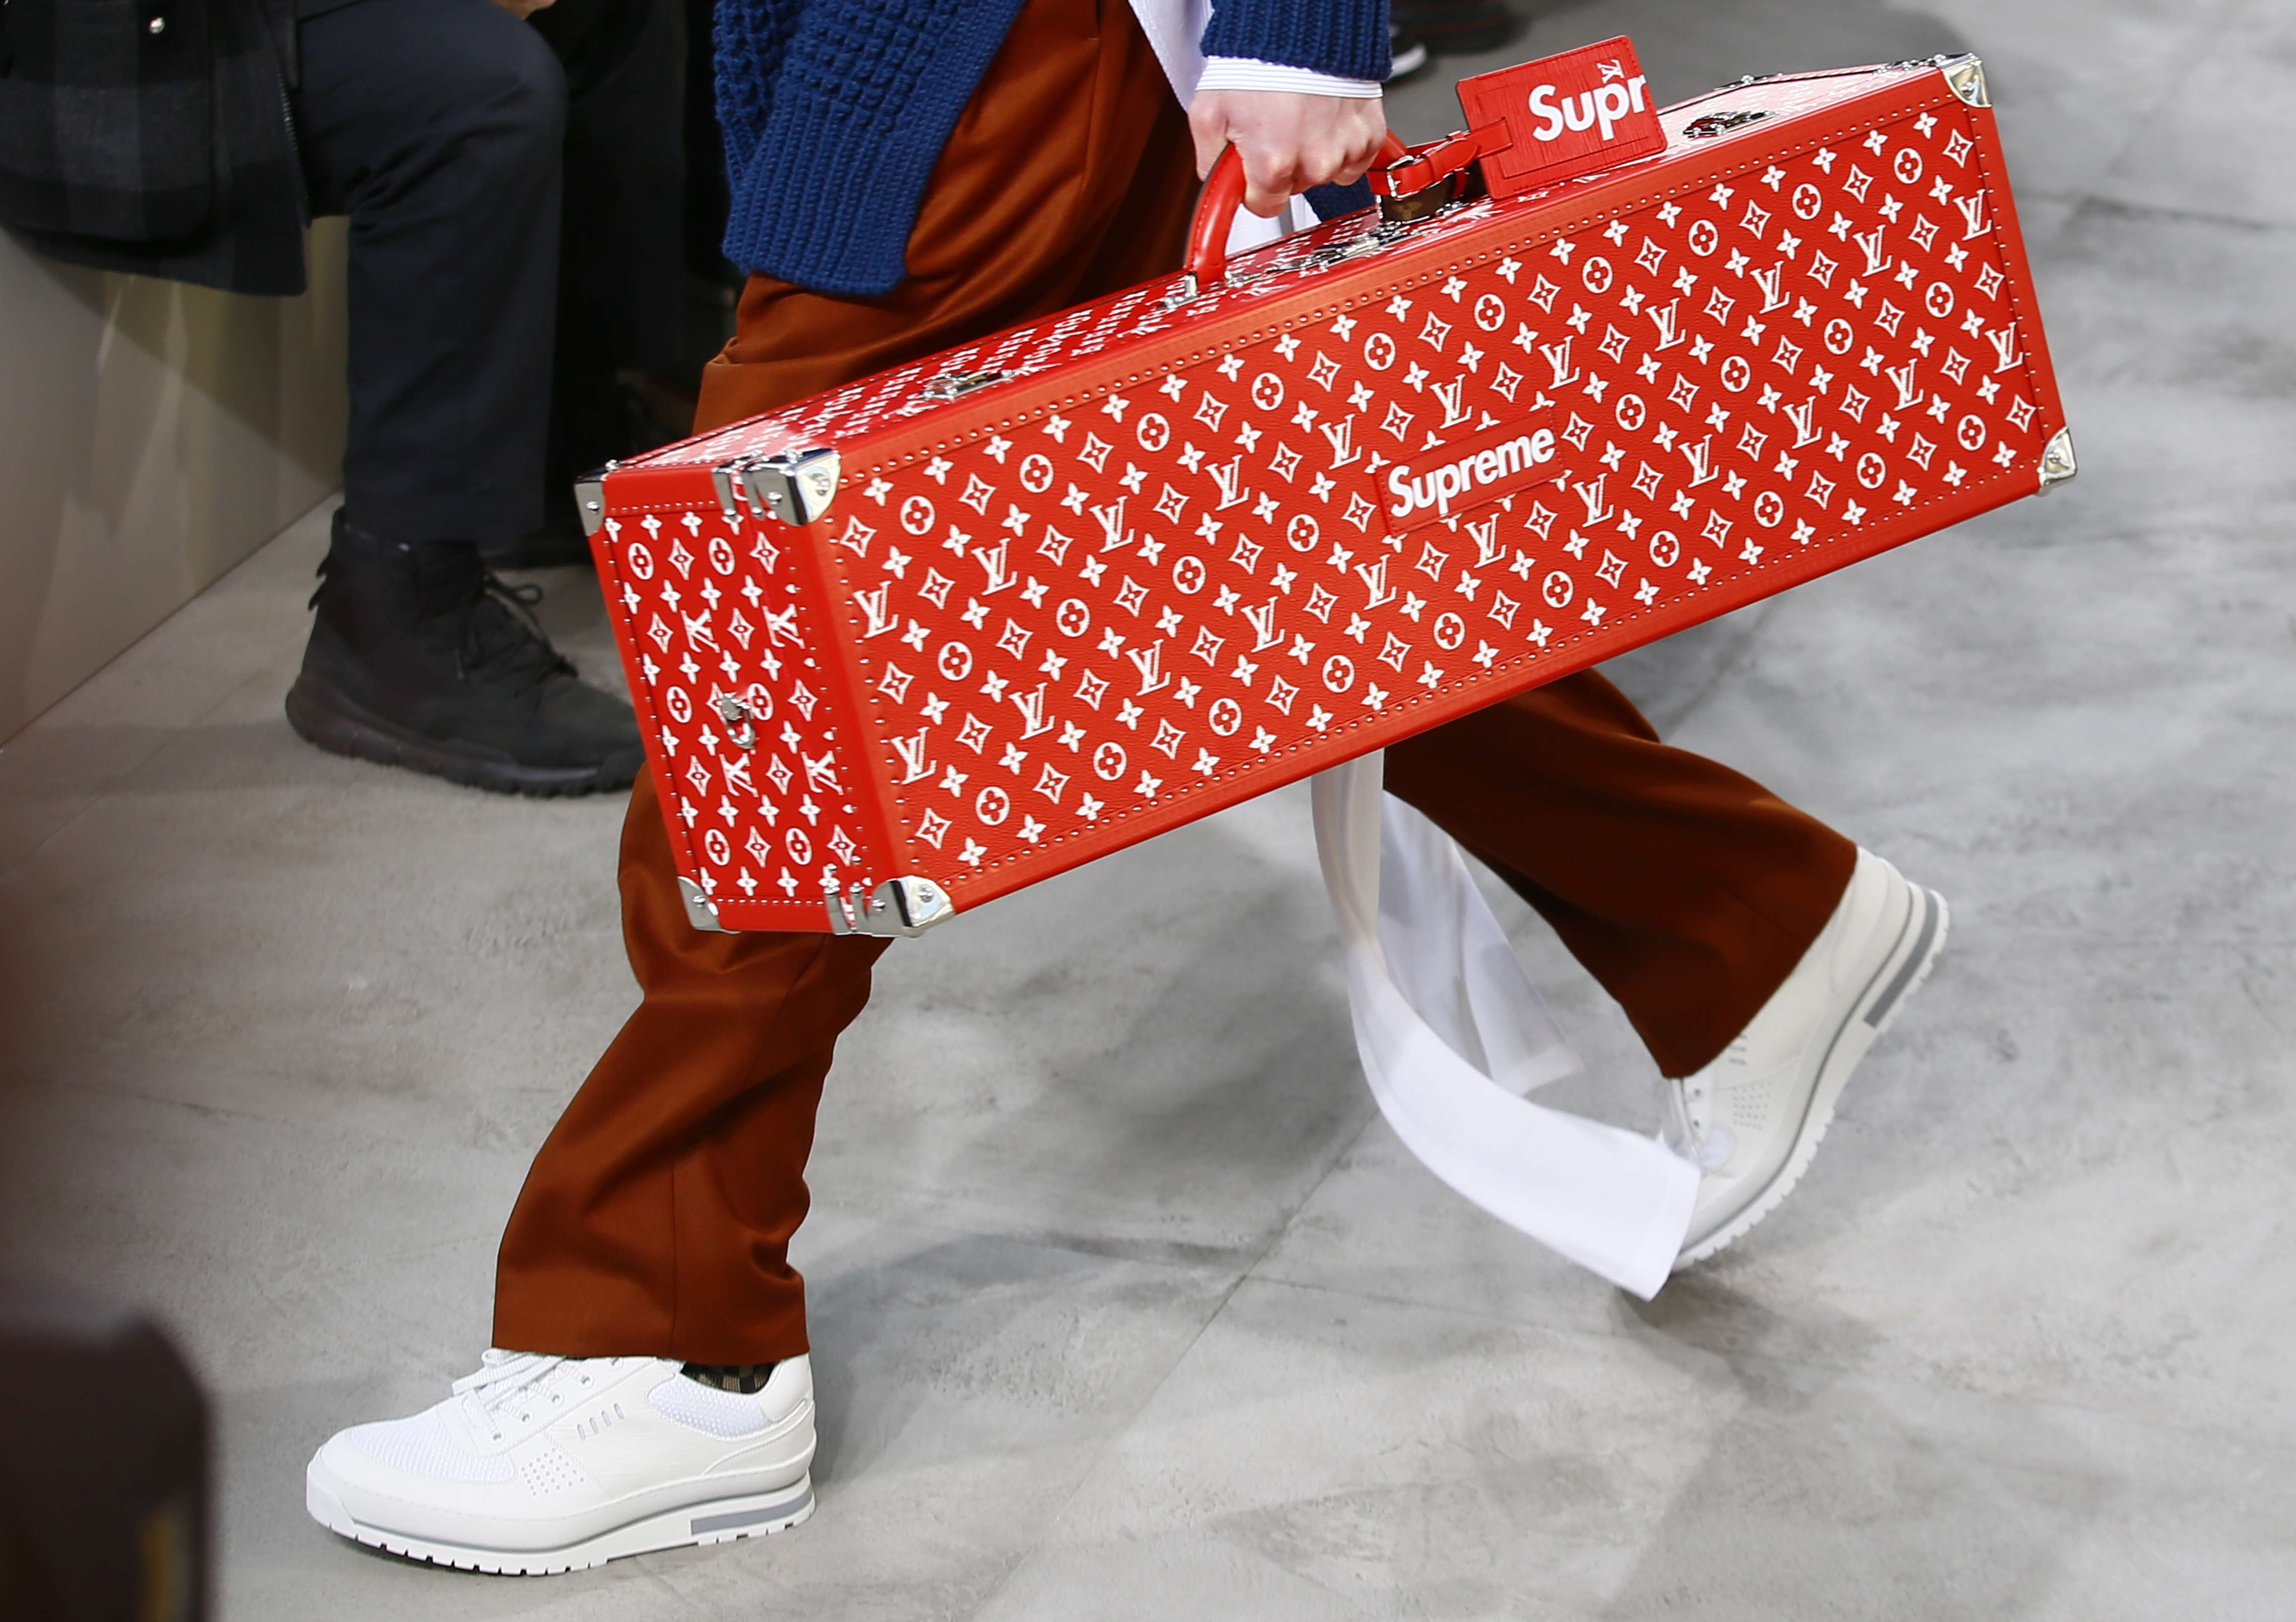 Adding the Supreme label to red Louis Vuitton trunks was one of the twists the label’s collaboration threw up. Photo: AP